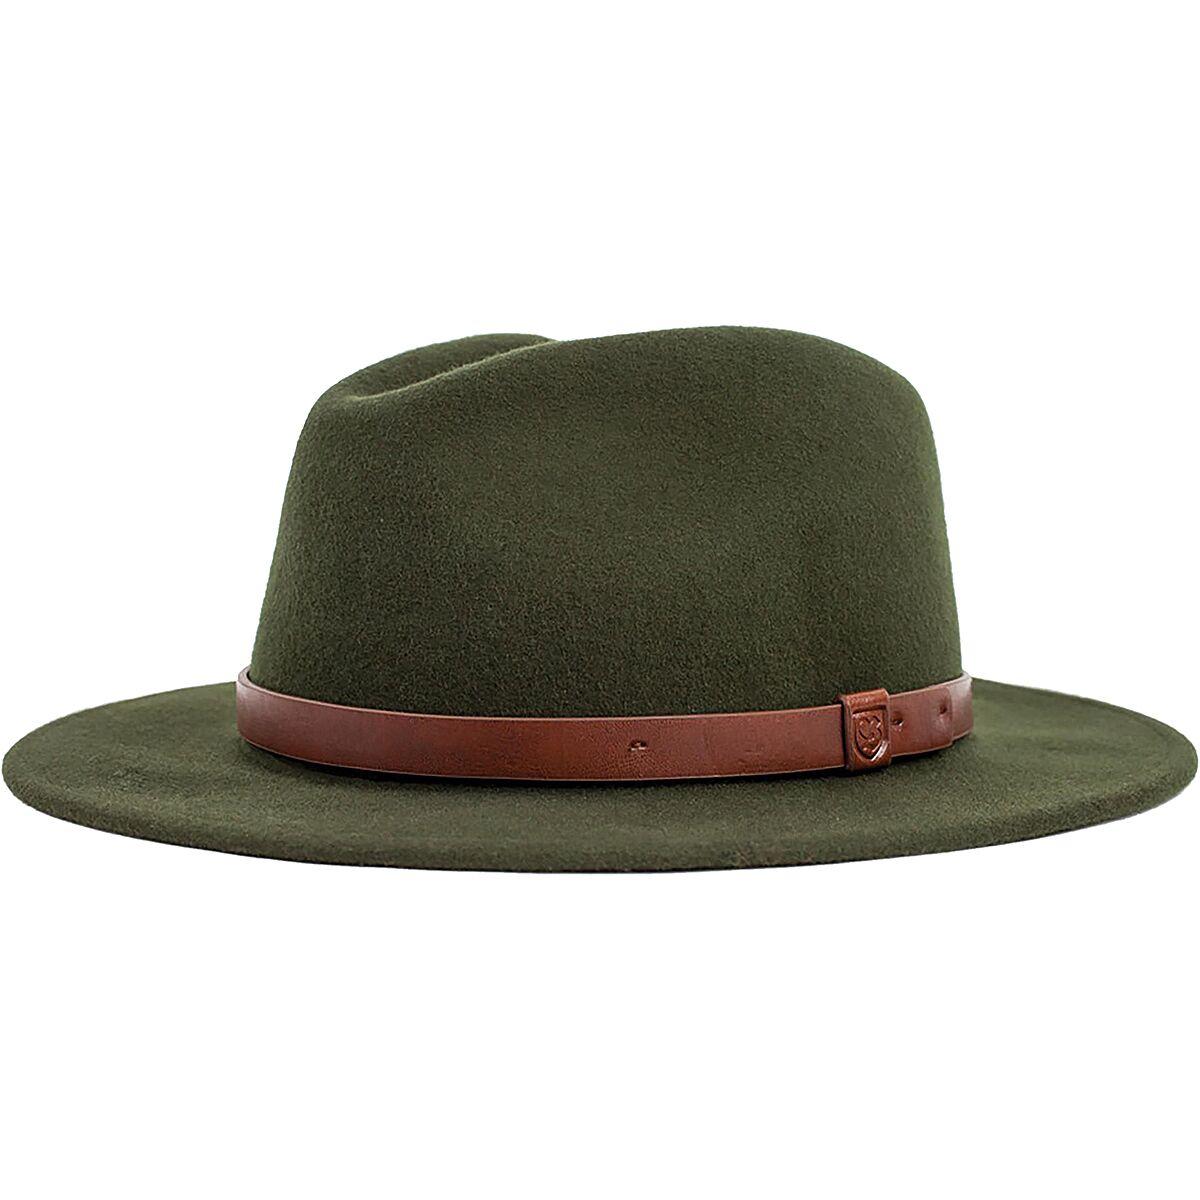 Brixton Messer Hat in Moss (Green) for Men - Save 16% - Lyst